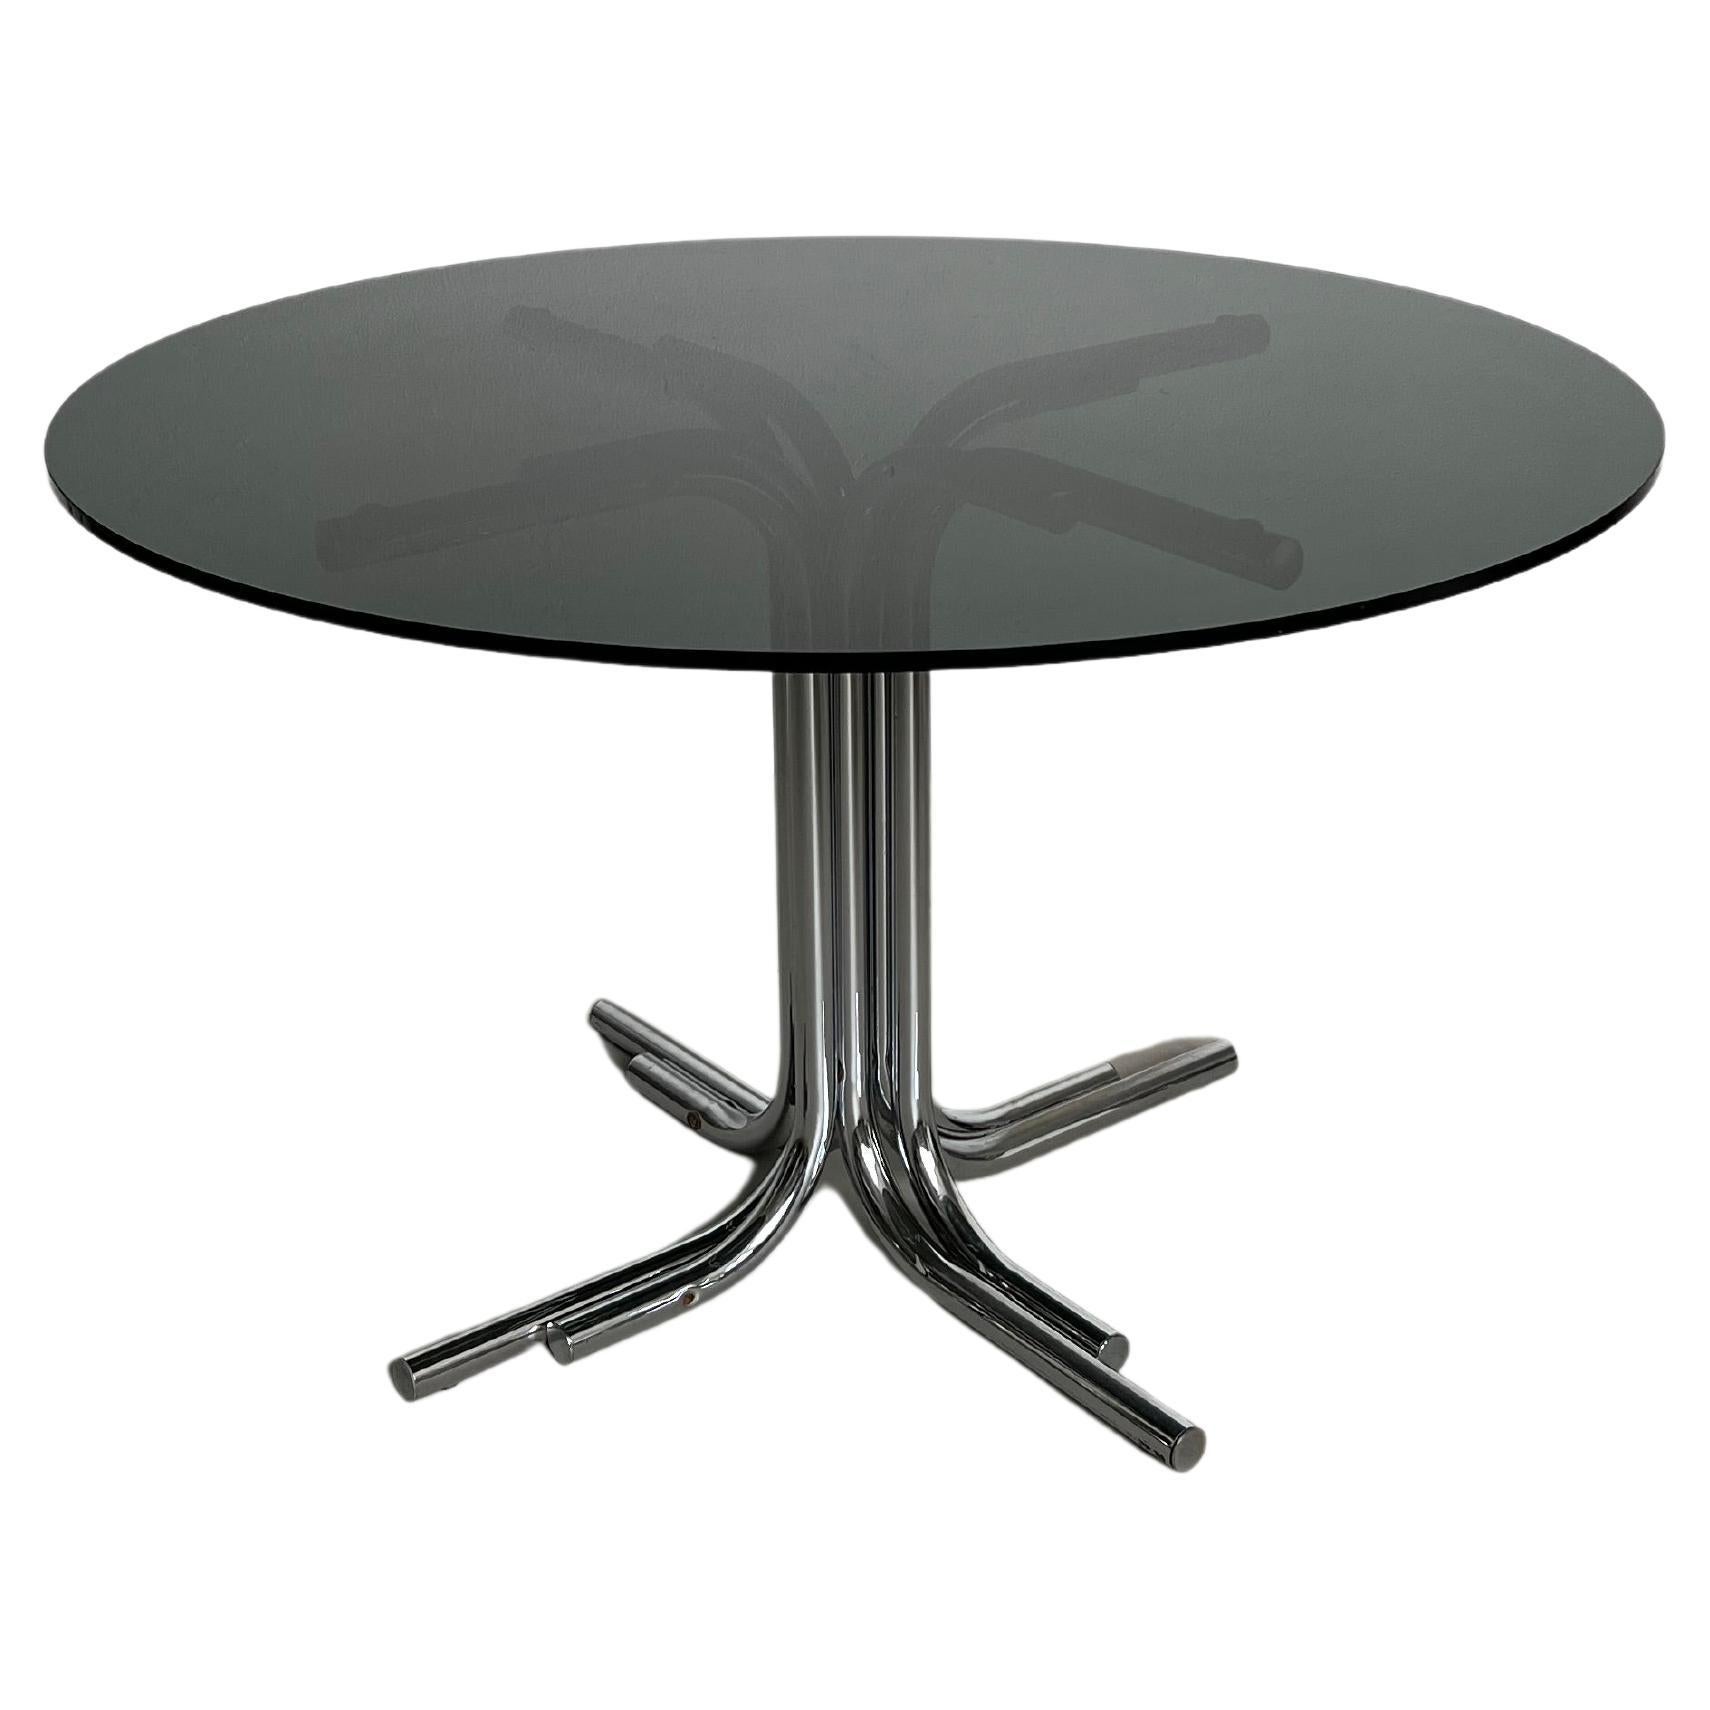 Vintage Italian Space Age Dining Table with Chromed Legs and Smoked Glass Top For Sale